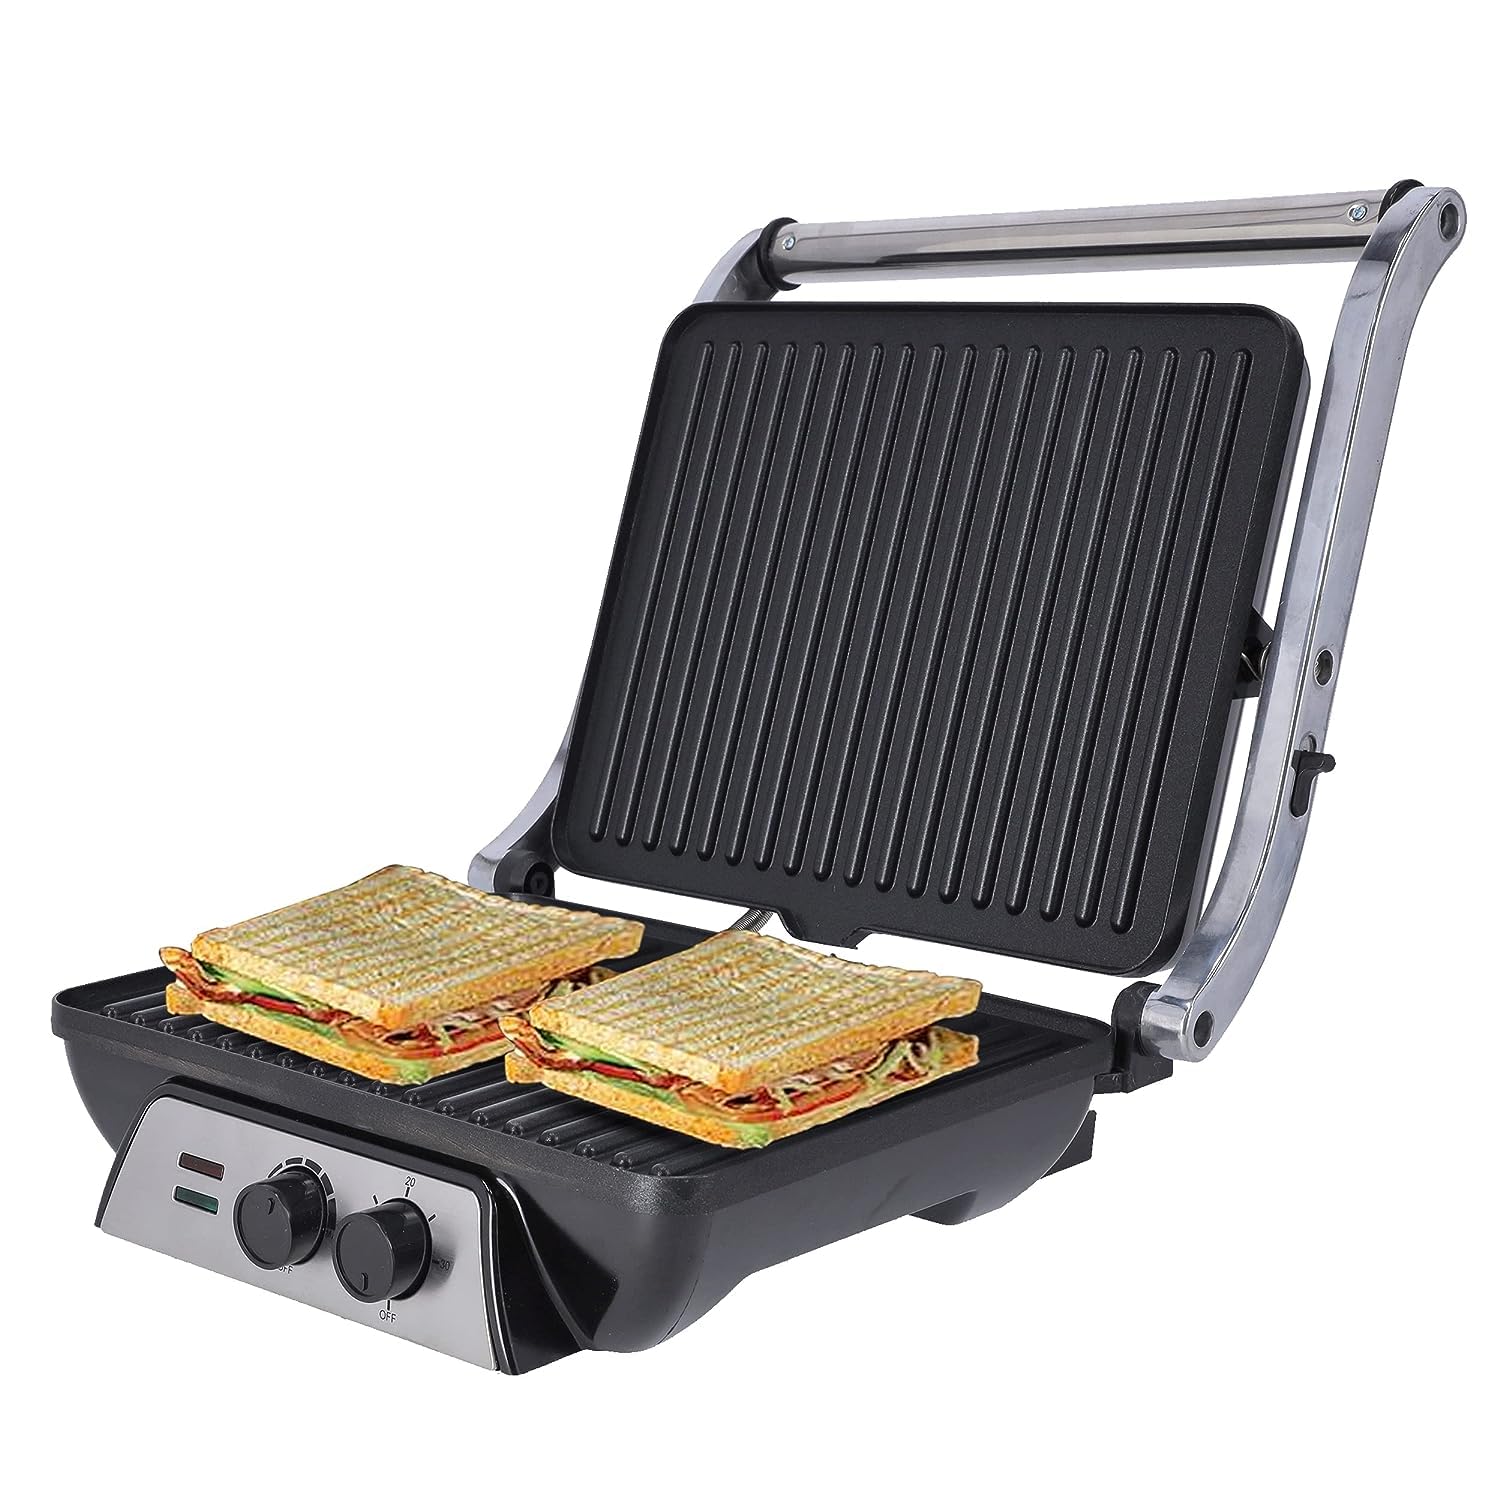 Olsenmark 2000W Super Jumbo Grill Sandwich Maker Opens 180 Degrees With Cool Touch Handle Adjustable Temperature & Timer With Indicator Light 2 Year Warranty, Multi Color, Omgm2441